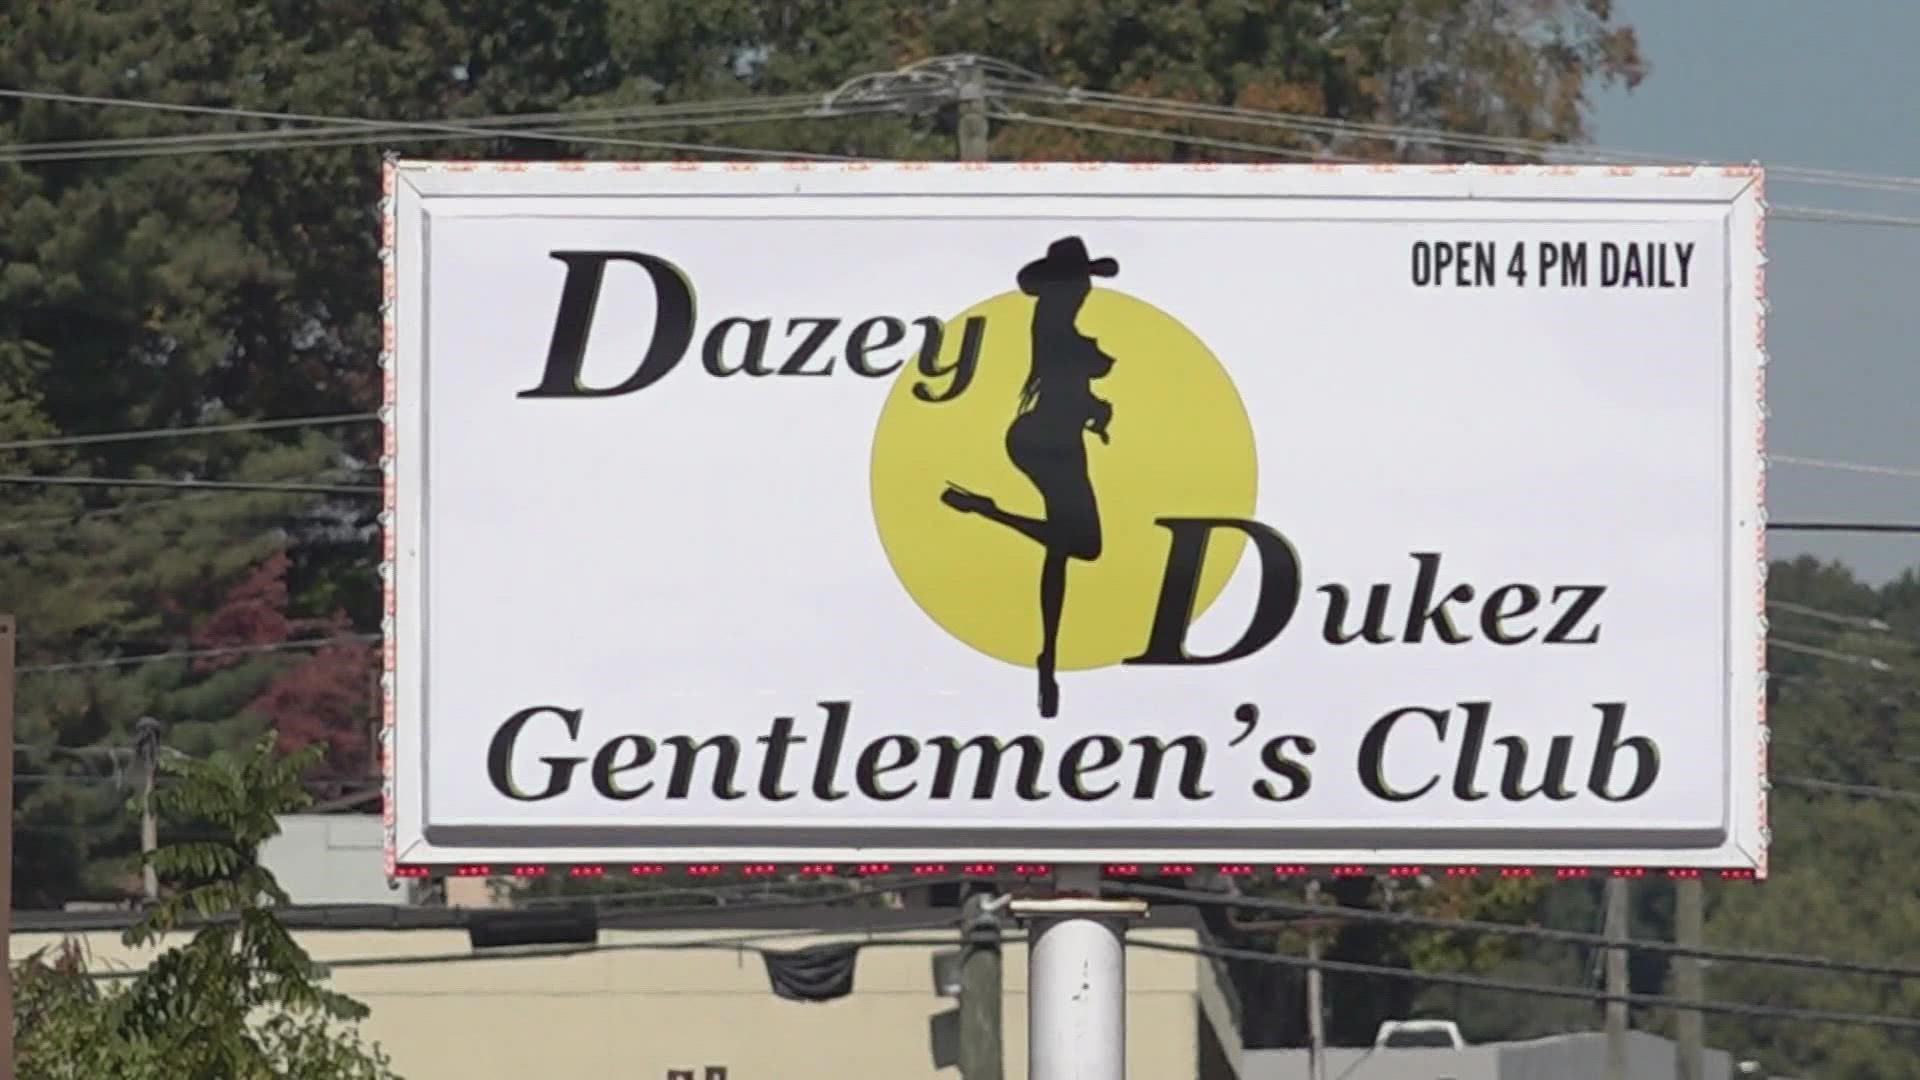 Over the past two weeks, Knox County 911 said it's received six calls for service at the Dazey Dukez Gentlemen's Club.